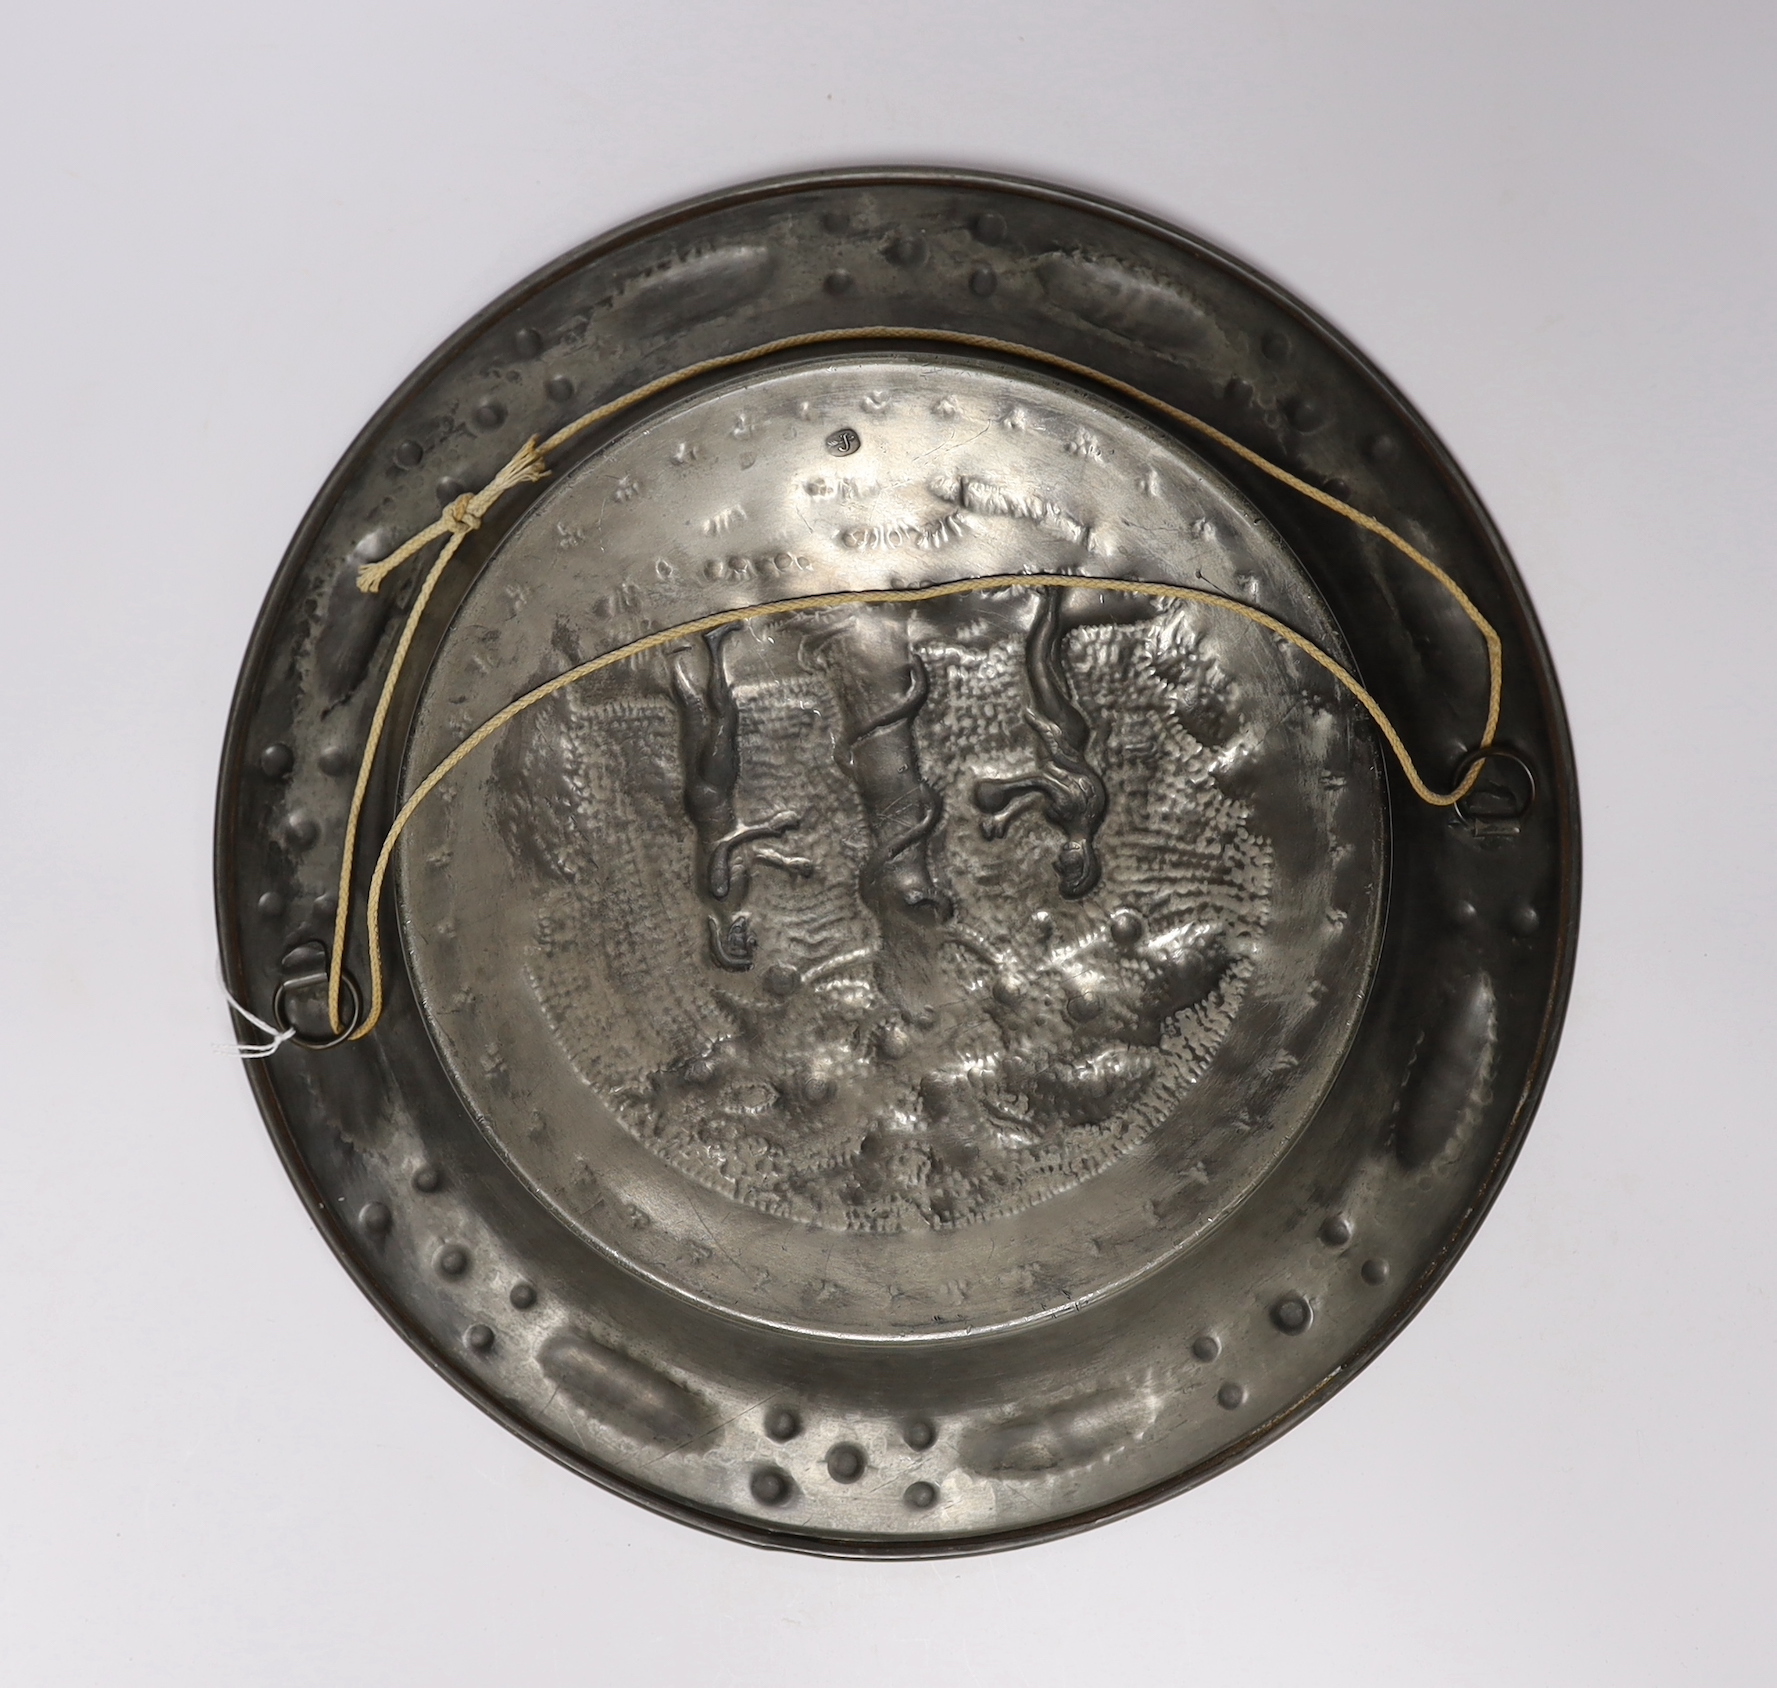 A large North European pewter 'Adam and Eve' alms dish, possibly Nuremberg 18th/19th century, impressed J mark, 40cm